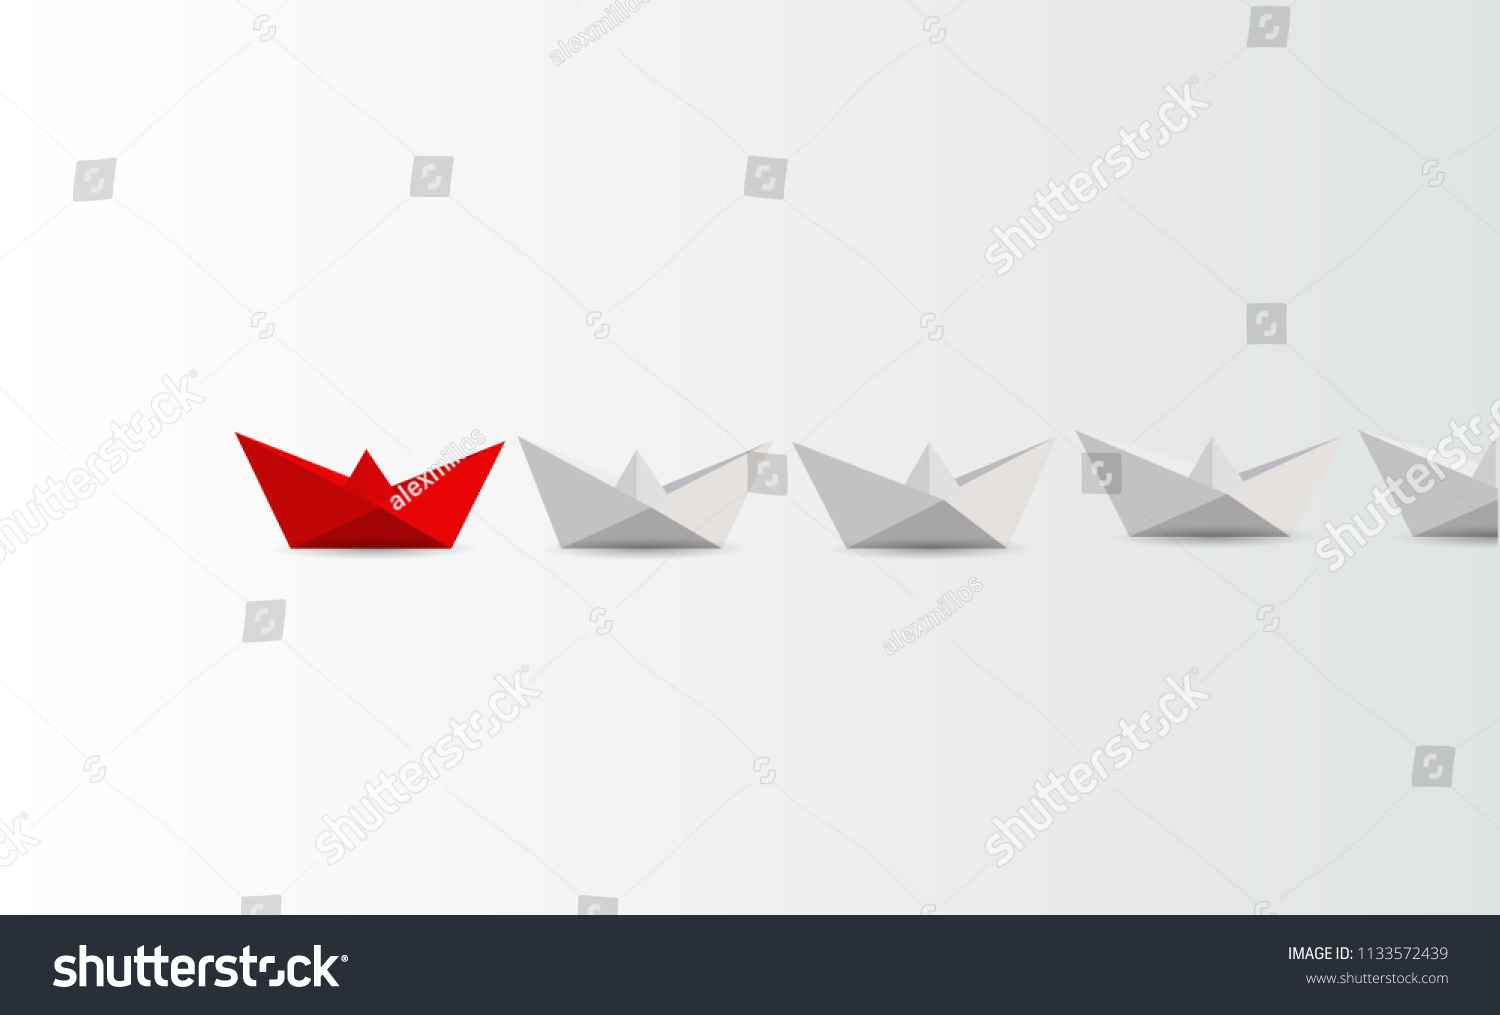 Leadership concept. Red and white paper boats. business concept. illustration design graphic #1133572439